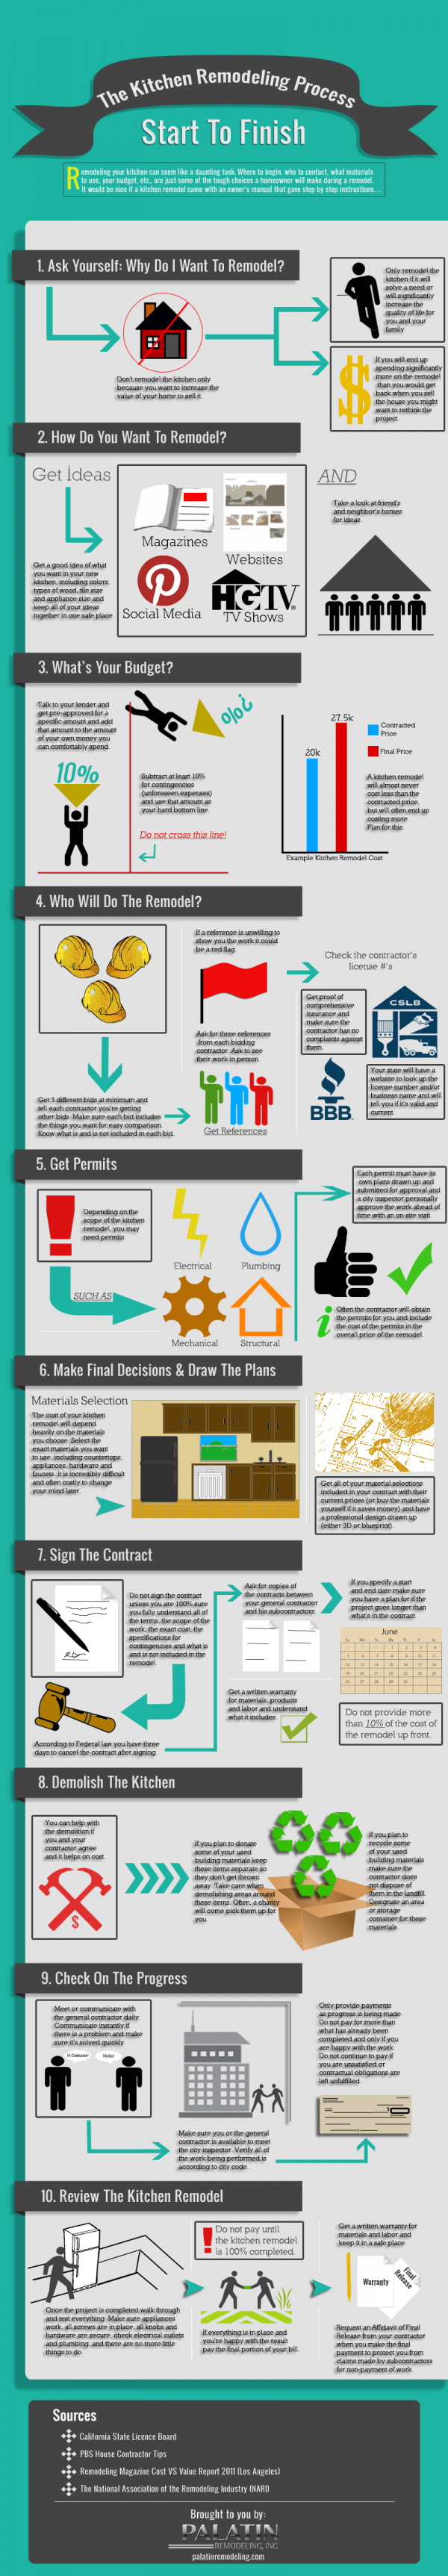 Kitchen-Remodeling-Infographic